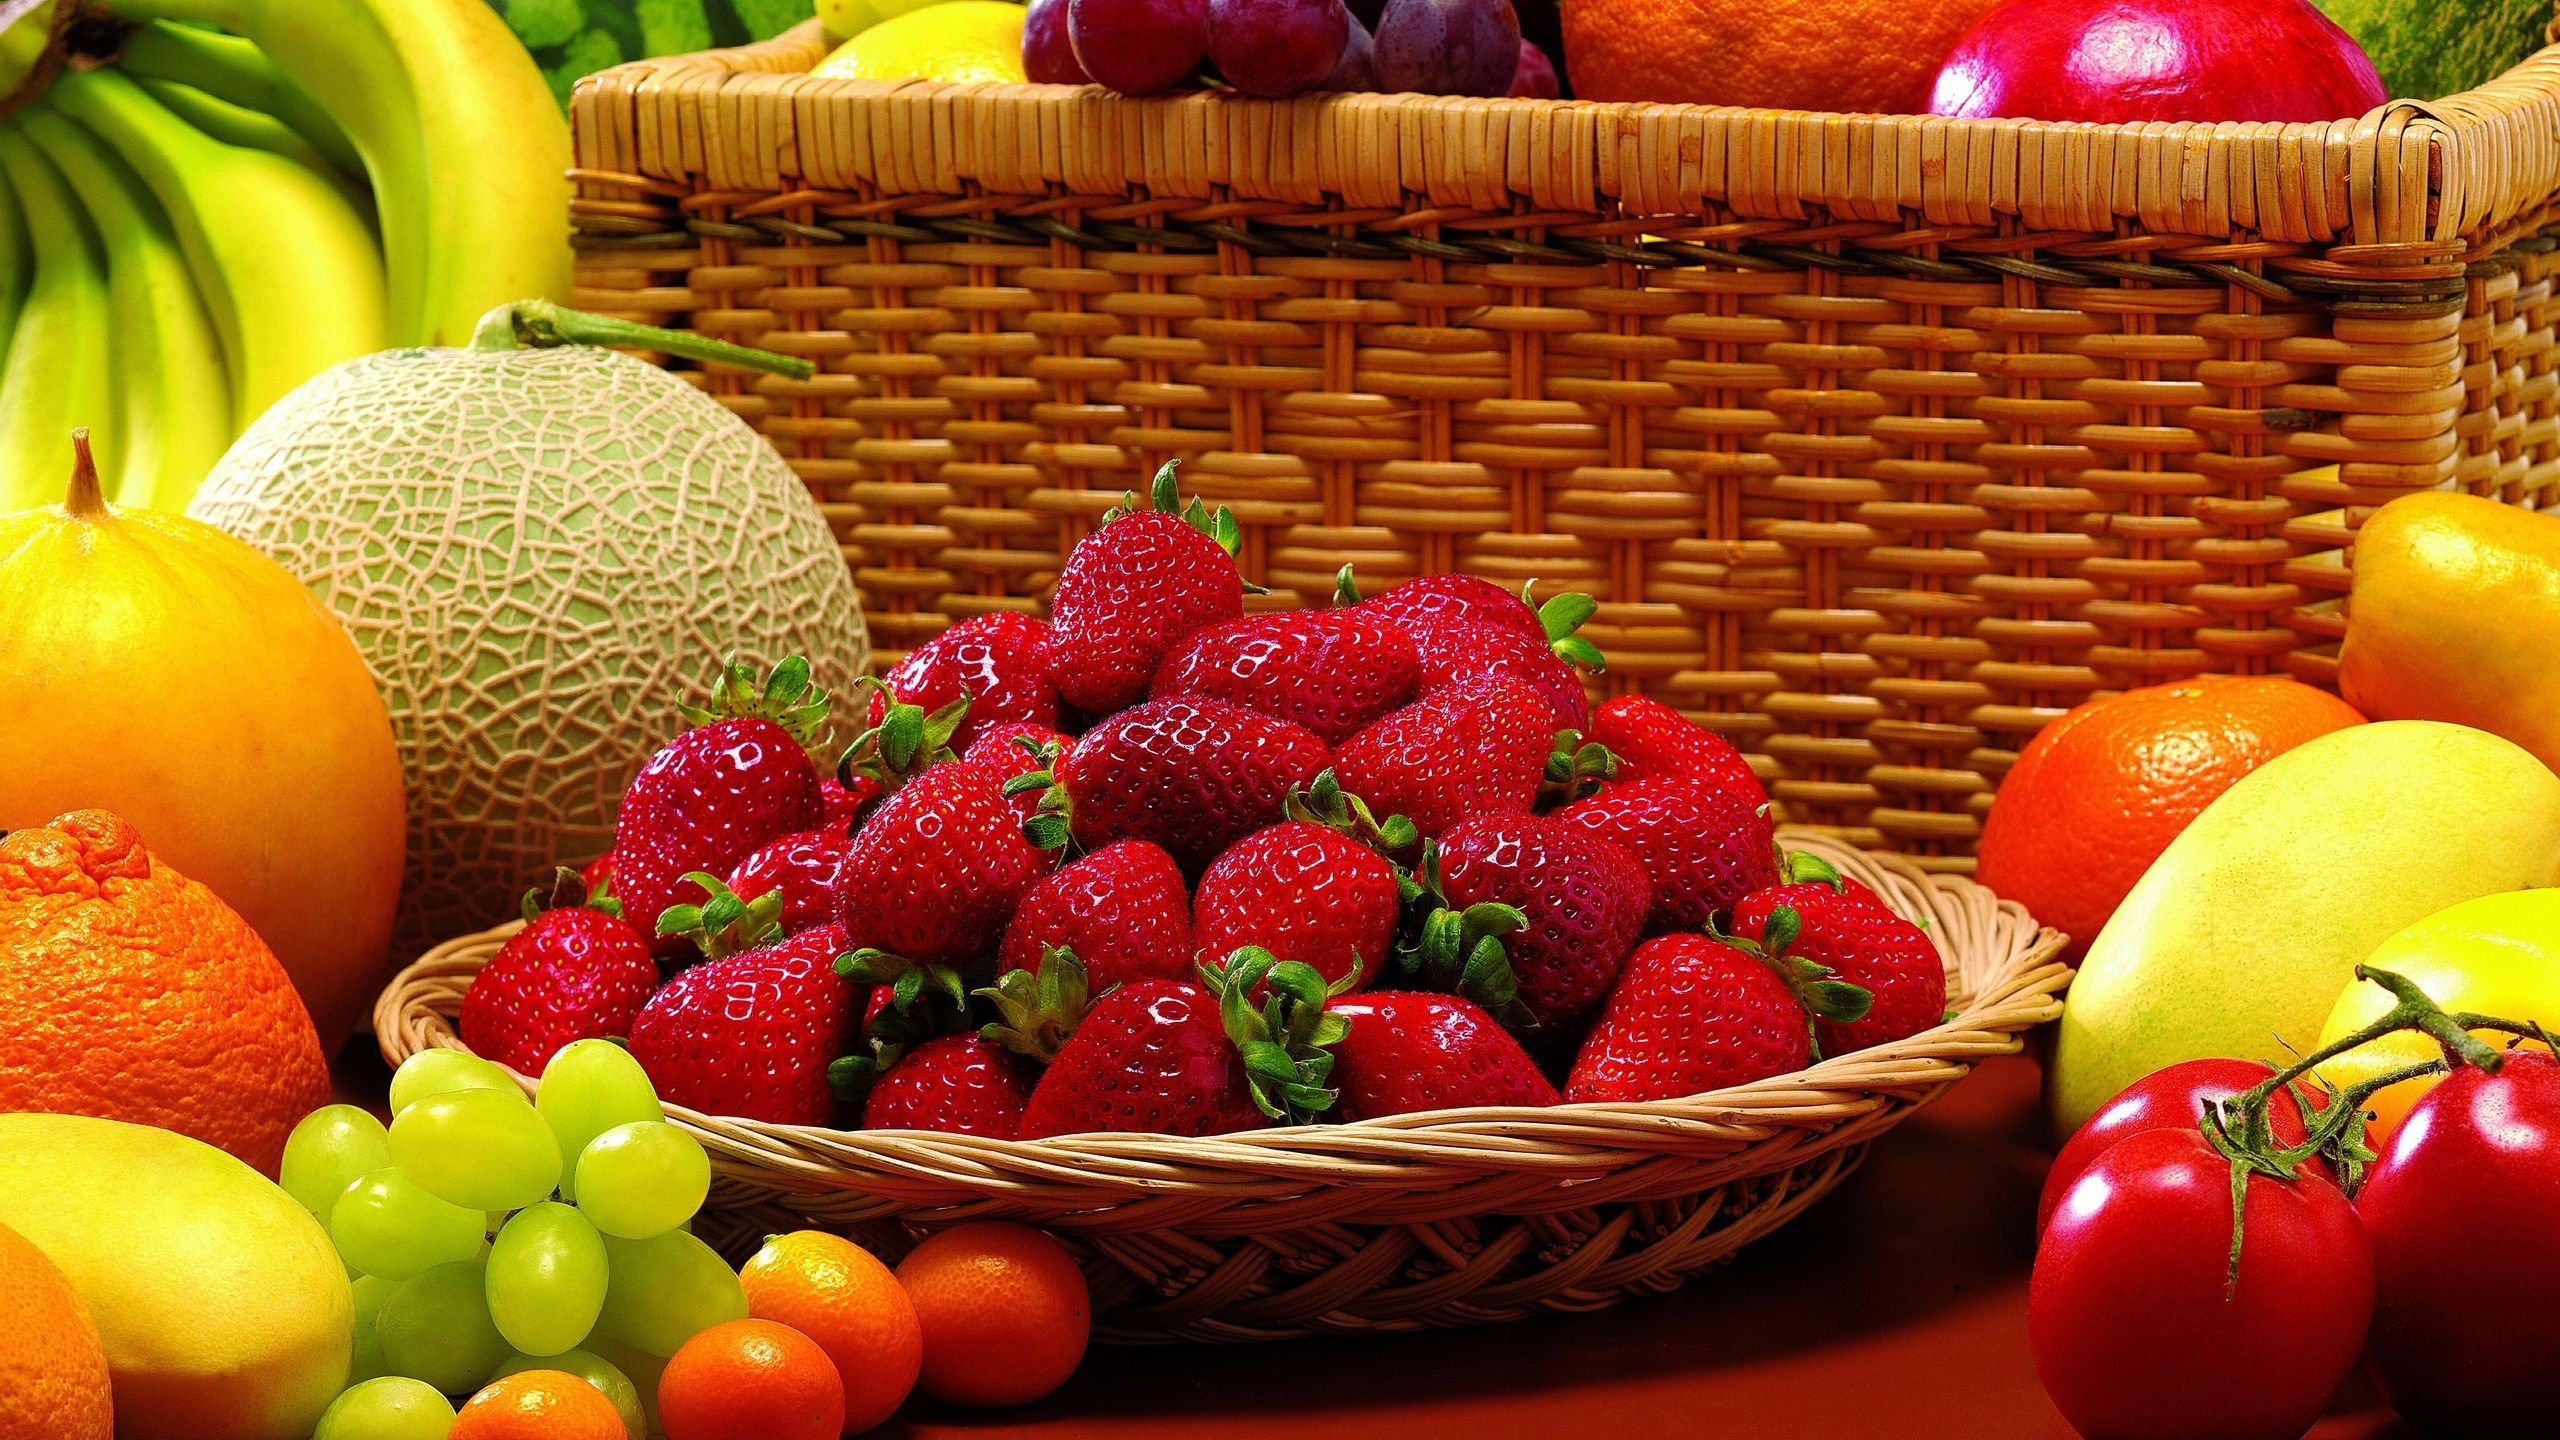 Amazing Fruits for 2560x1440 HDTV resolution